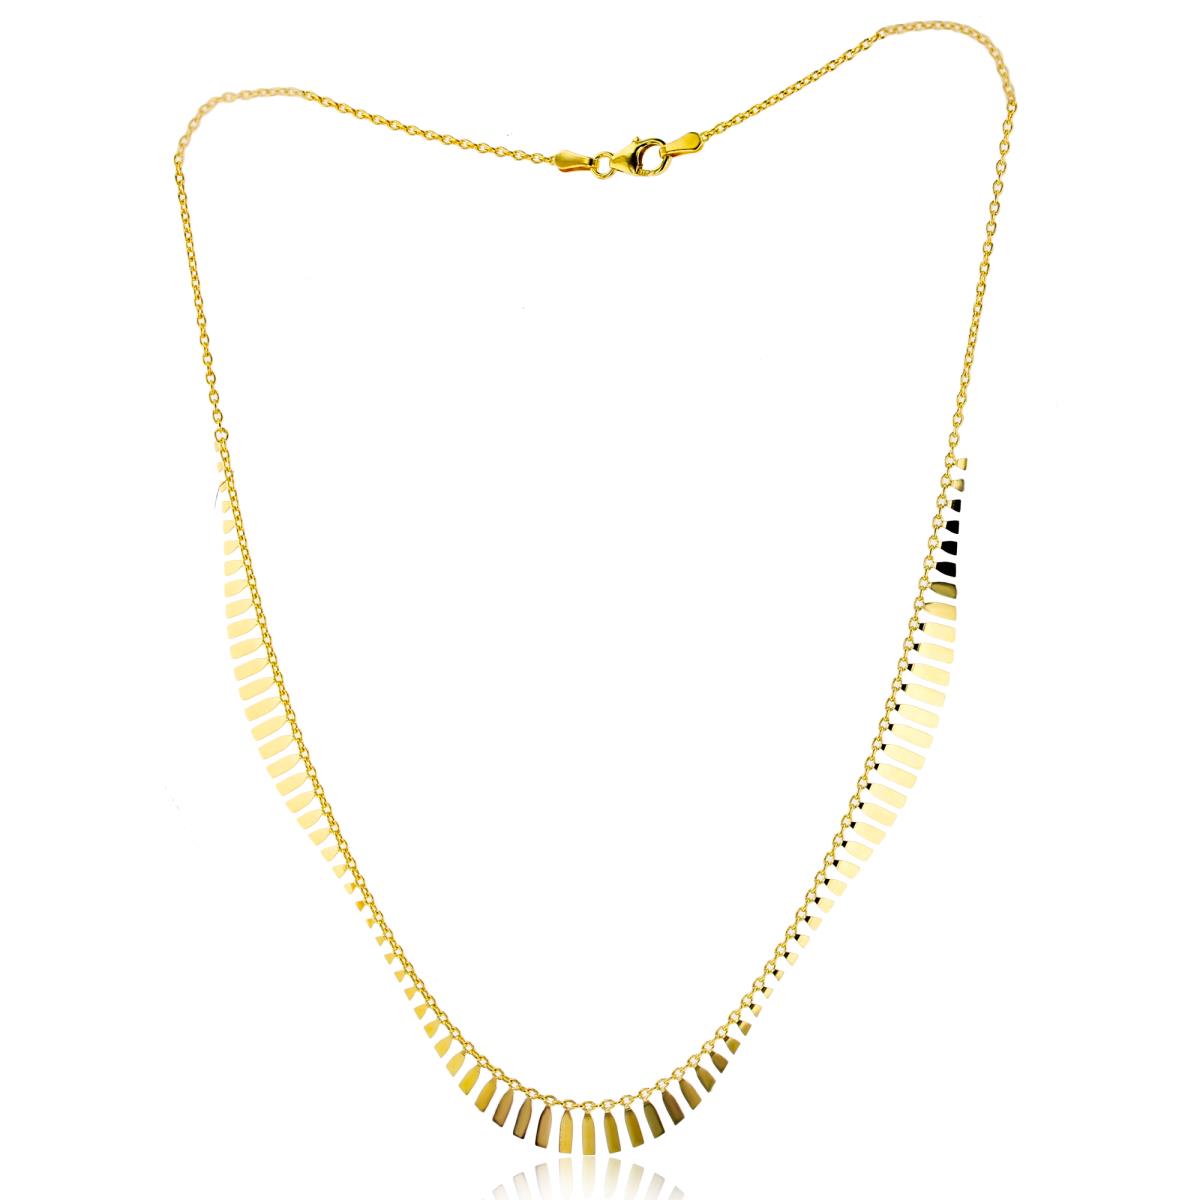 10K Yellow Gold Polished Wavy Bars Fancy 16" Necklace